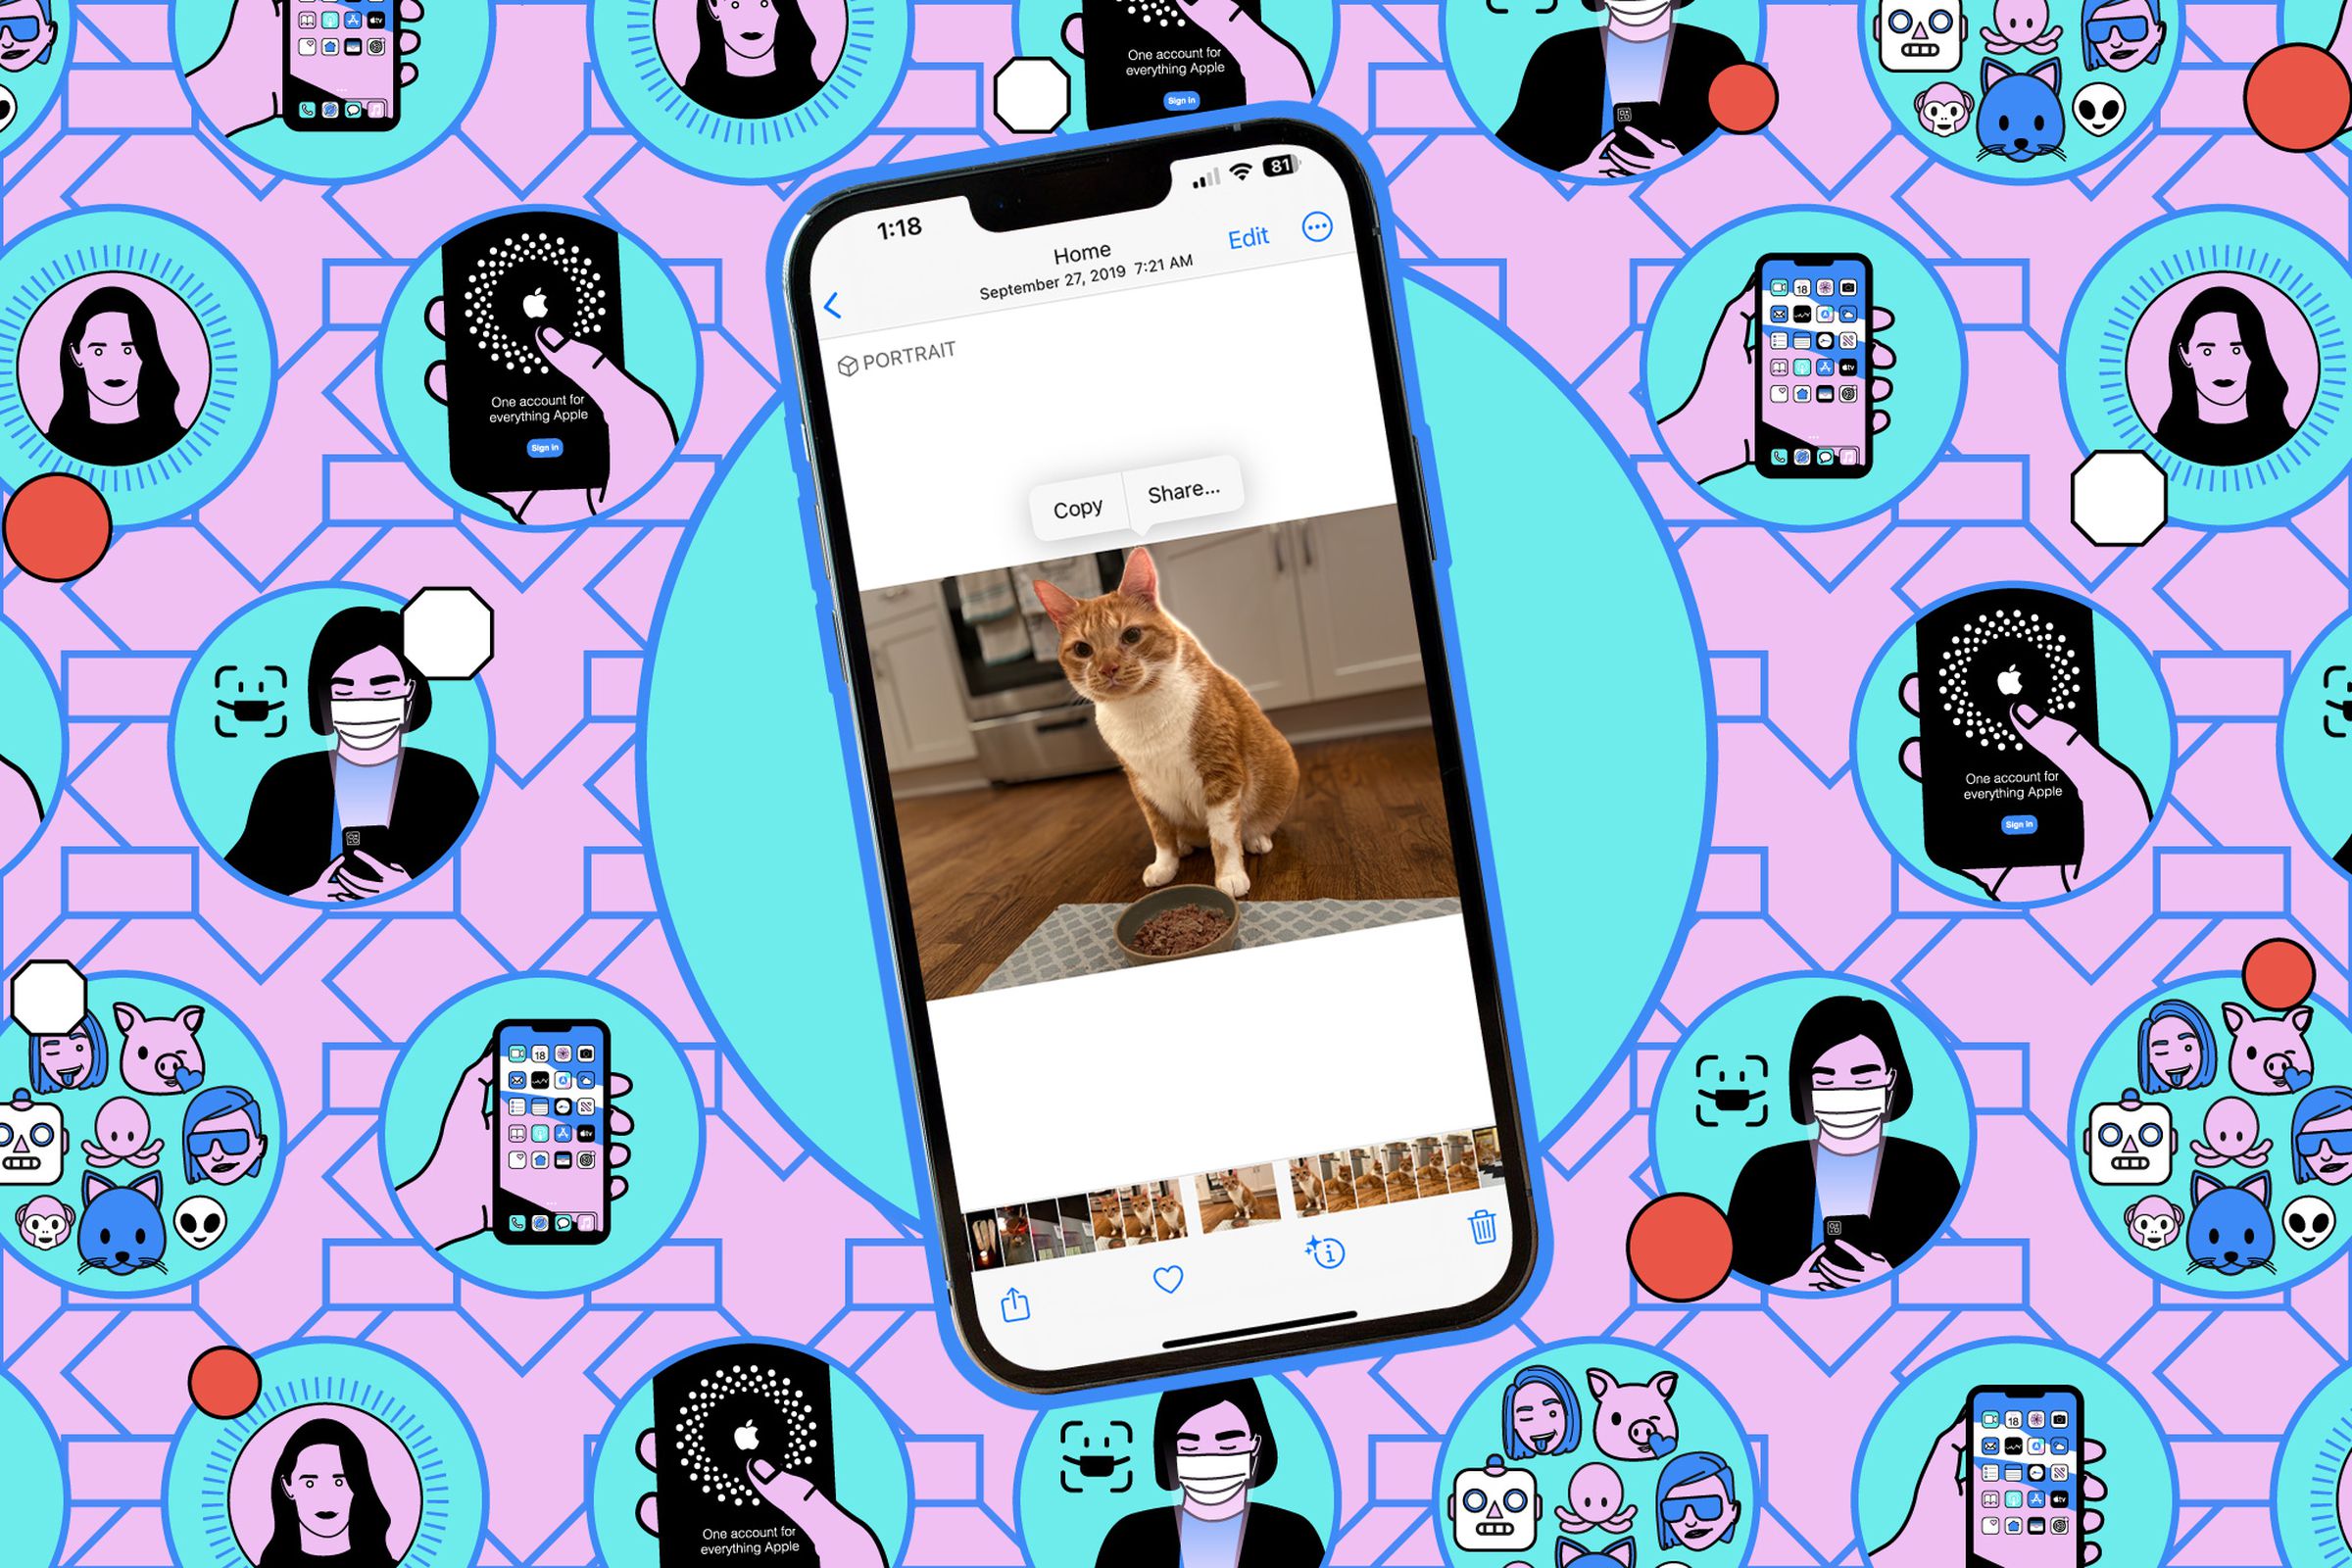 Illustration of a phone with a photo of a cat featured on screen.